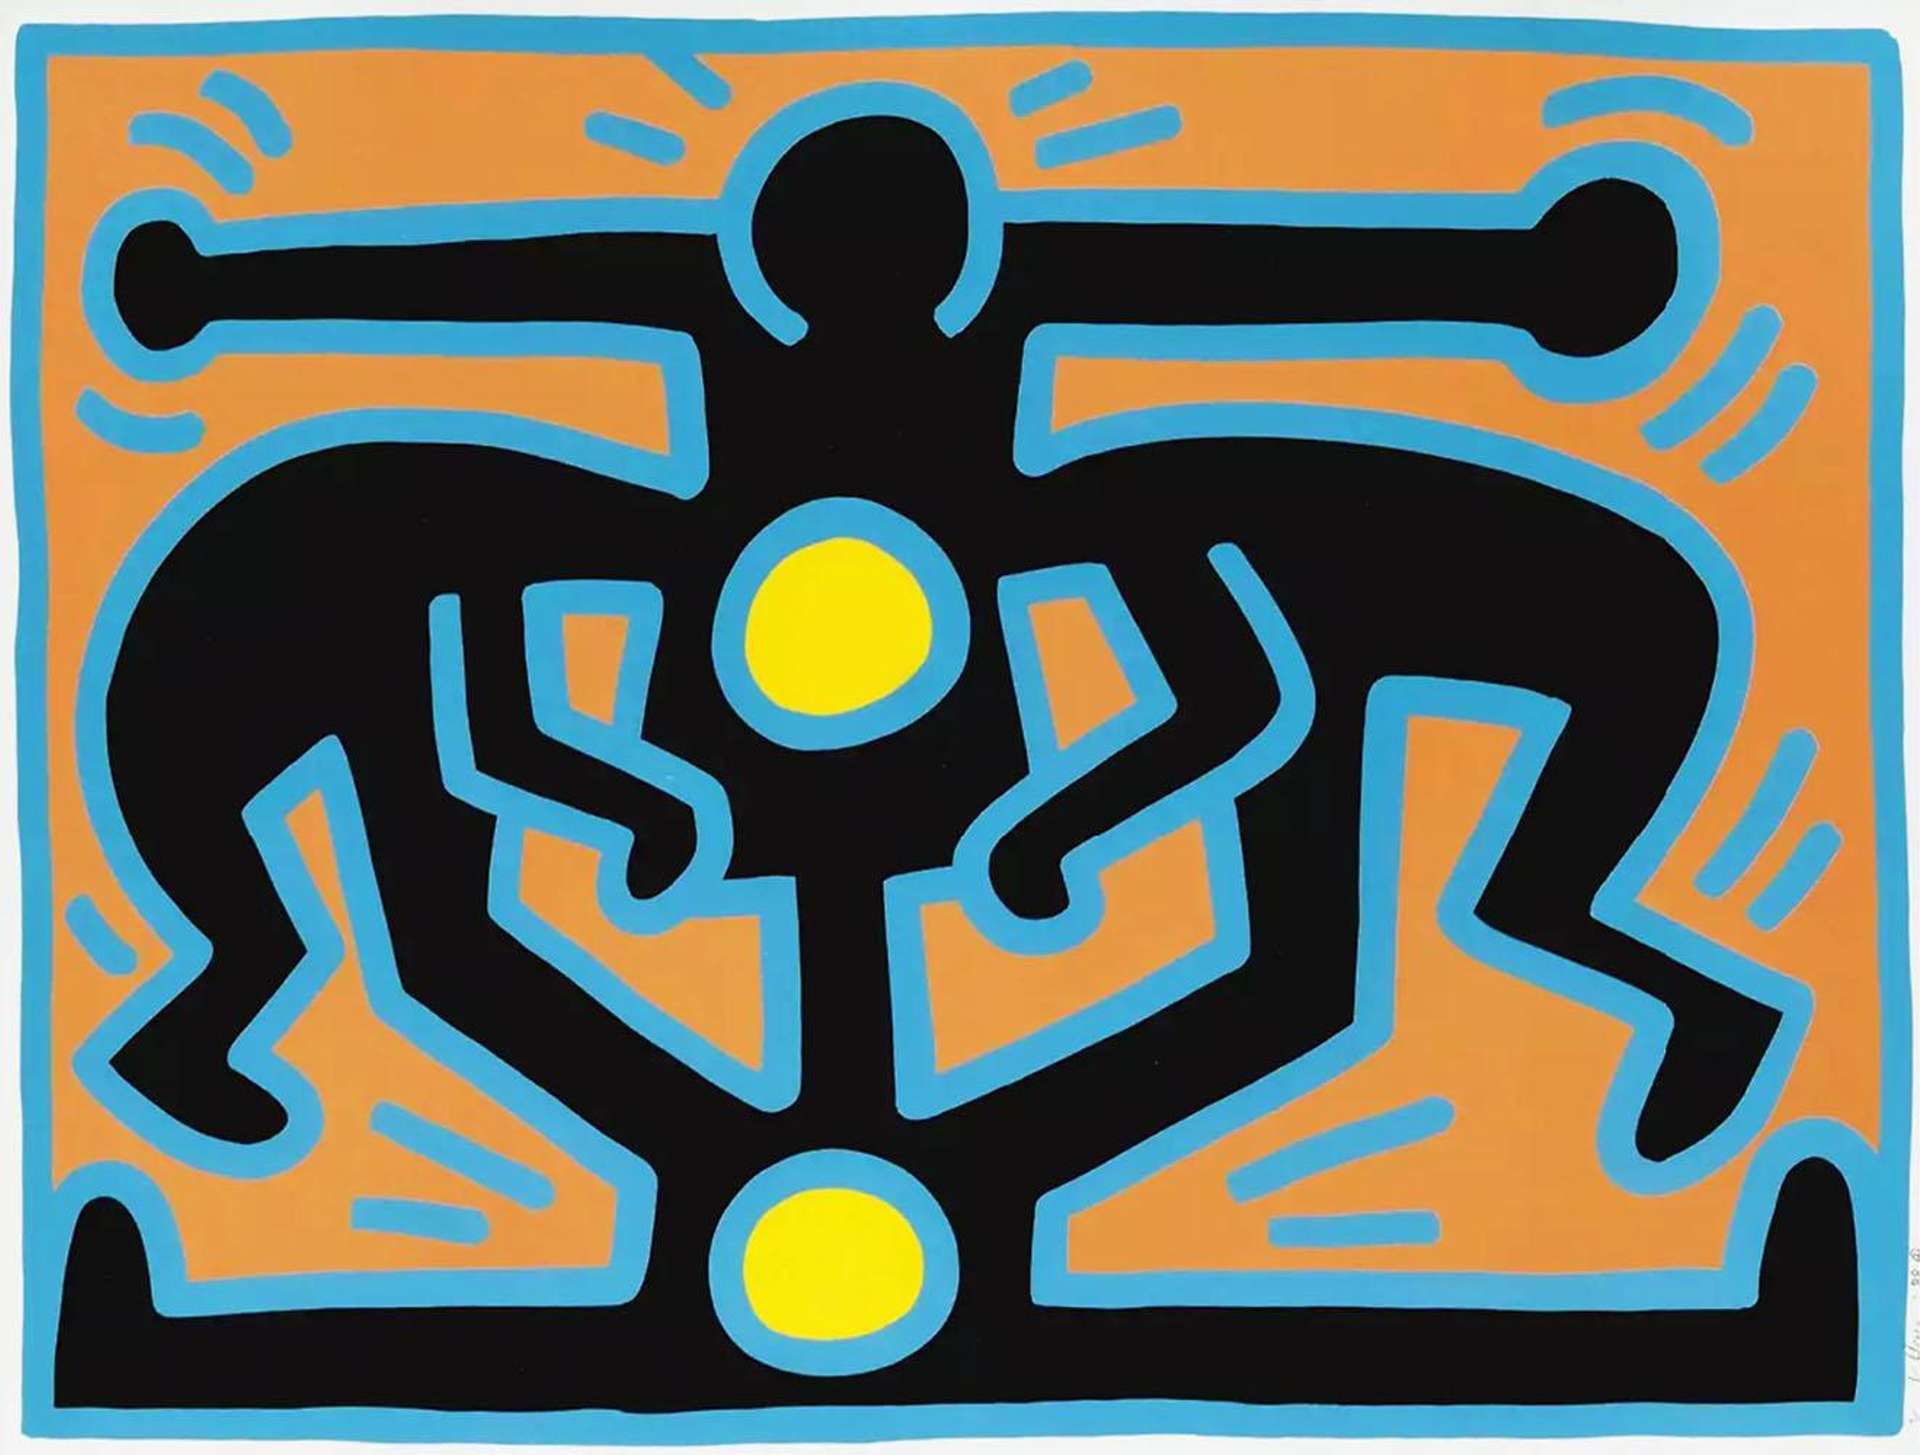 A Keith Haring screenprint featuring three genderless figures drawn in black, merging together through various body parts, symbolising unity and harmony.